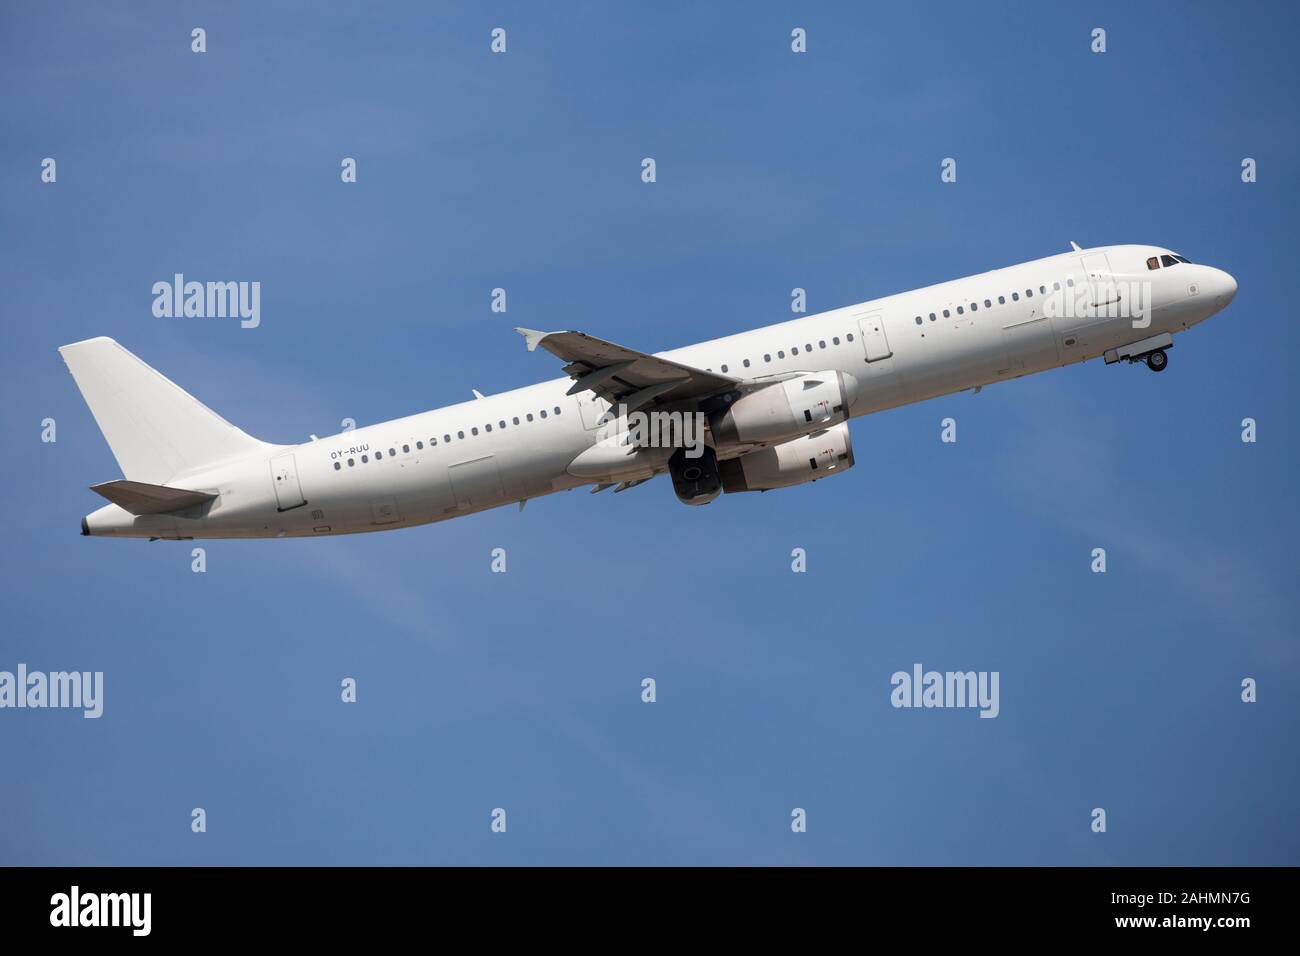 Barcelona, Spain - August 23, 2019: Danish Air Transport Airbus A321 without livery taking off from El Prat Airport in Barcelona, Spain. Stock Photo